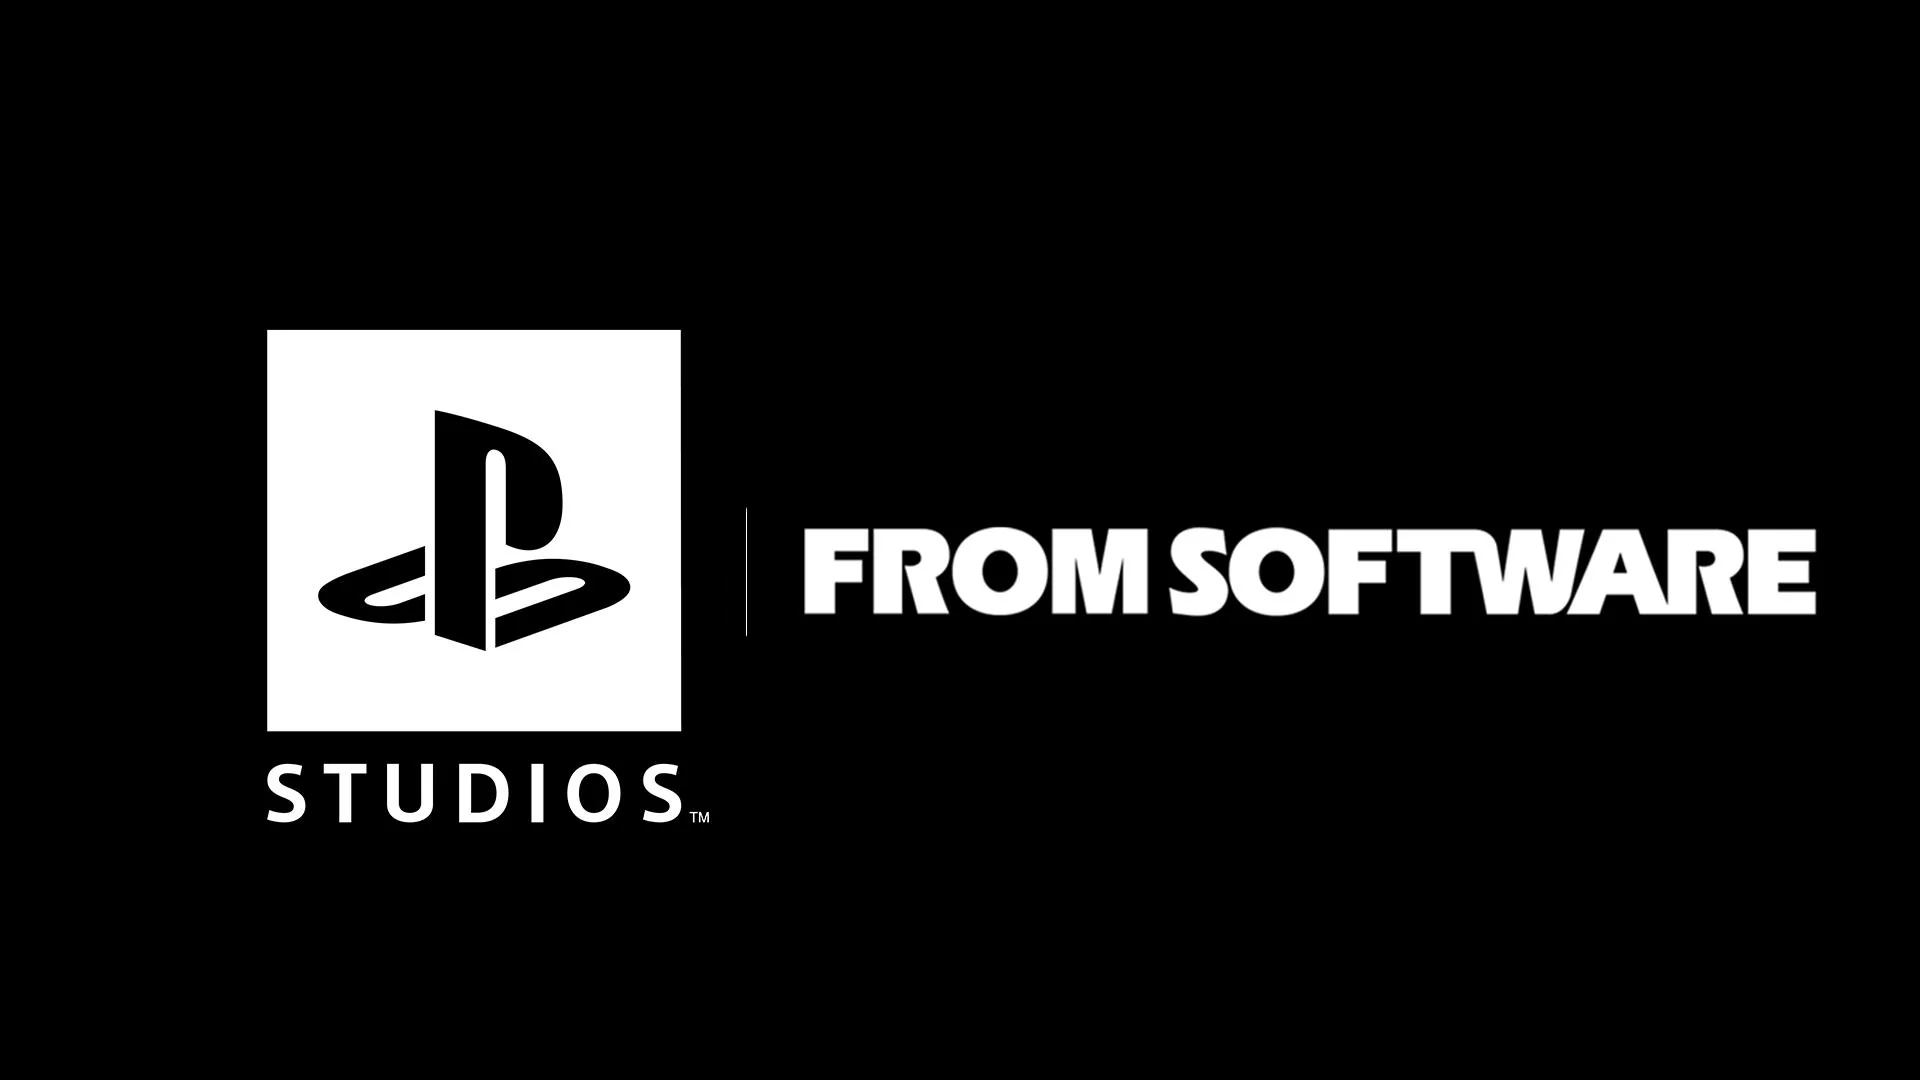 Rumors suggest Bloodborne is heading to PC and PS5 – but we're not  convinced yet